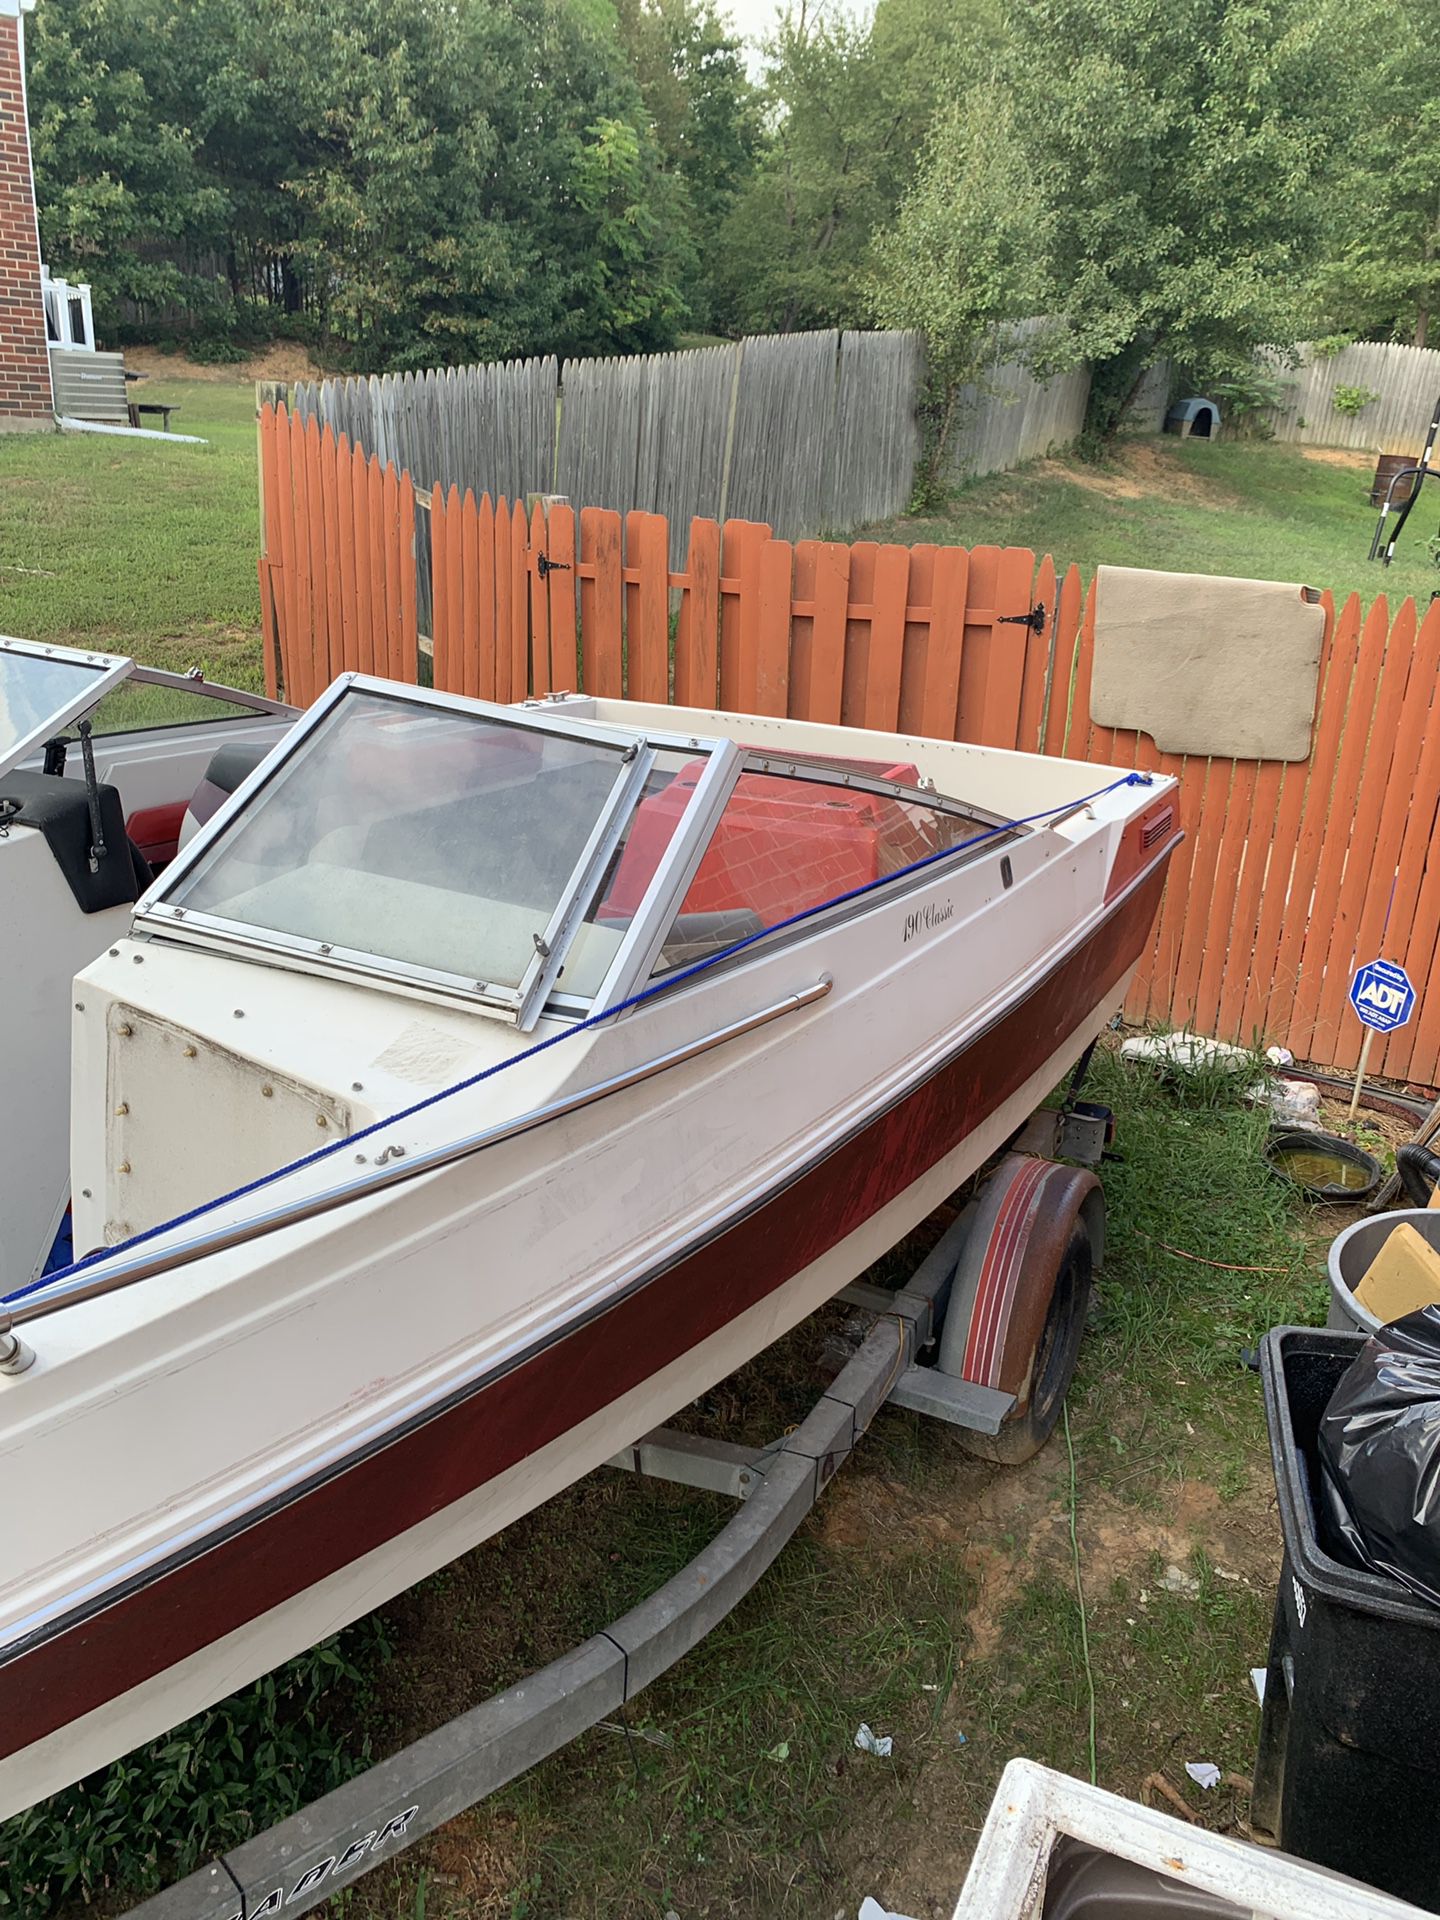 Used boat. Sale as is. Boat does run/ did run the last time I ran it.